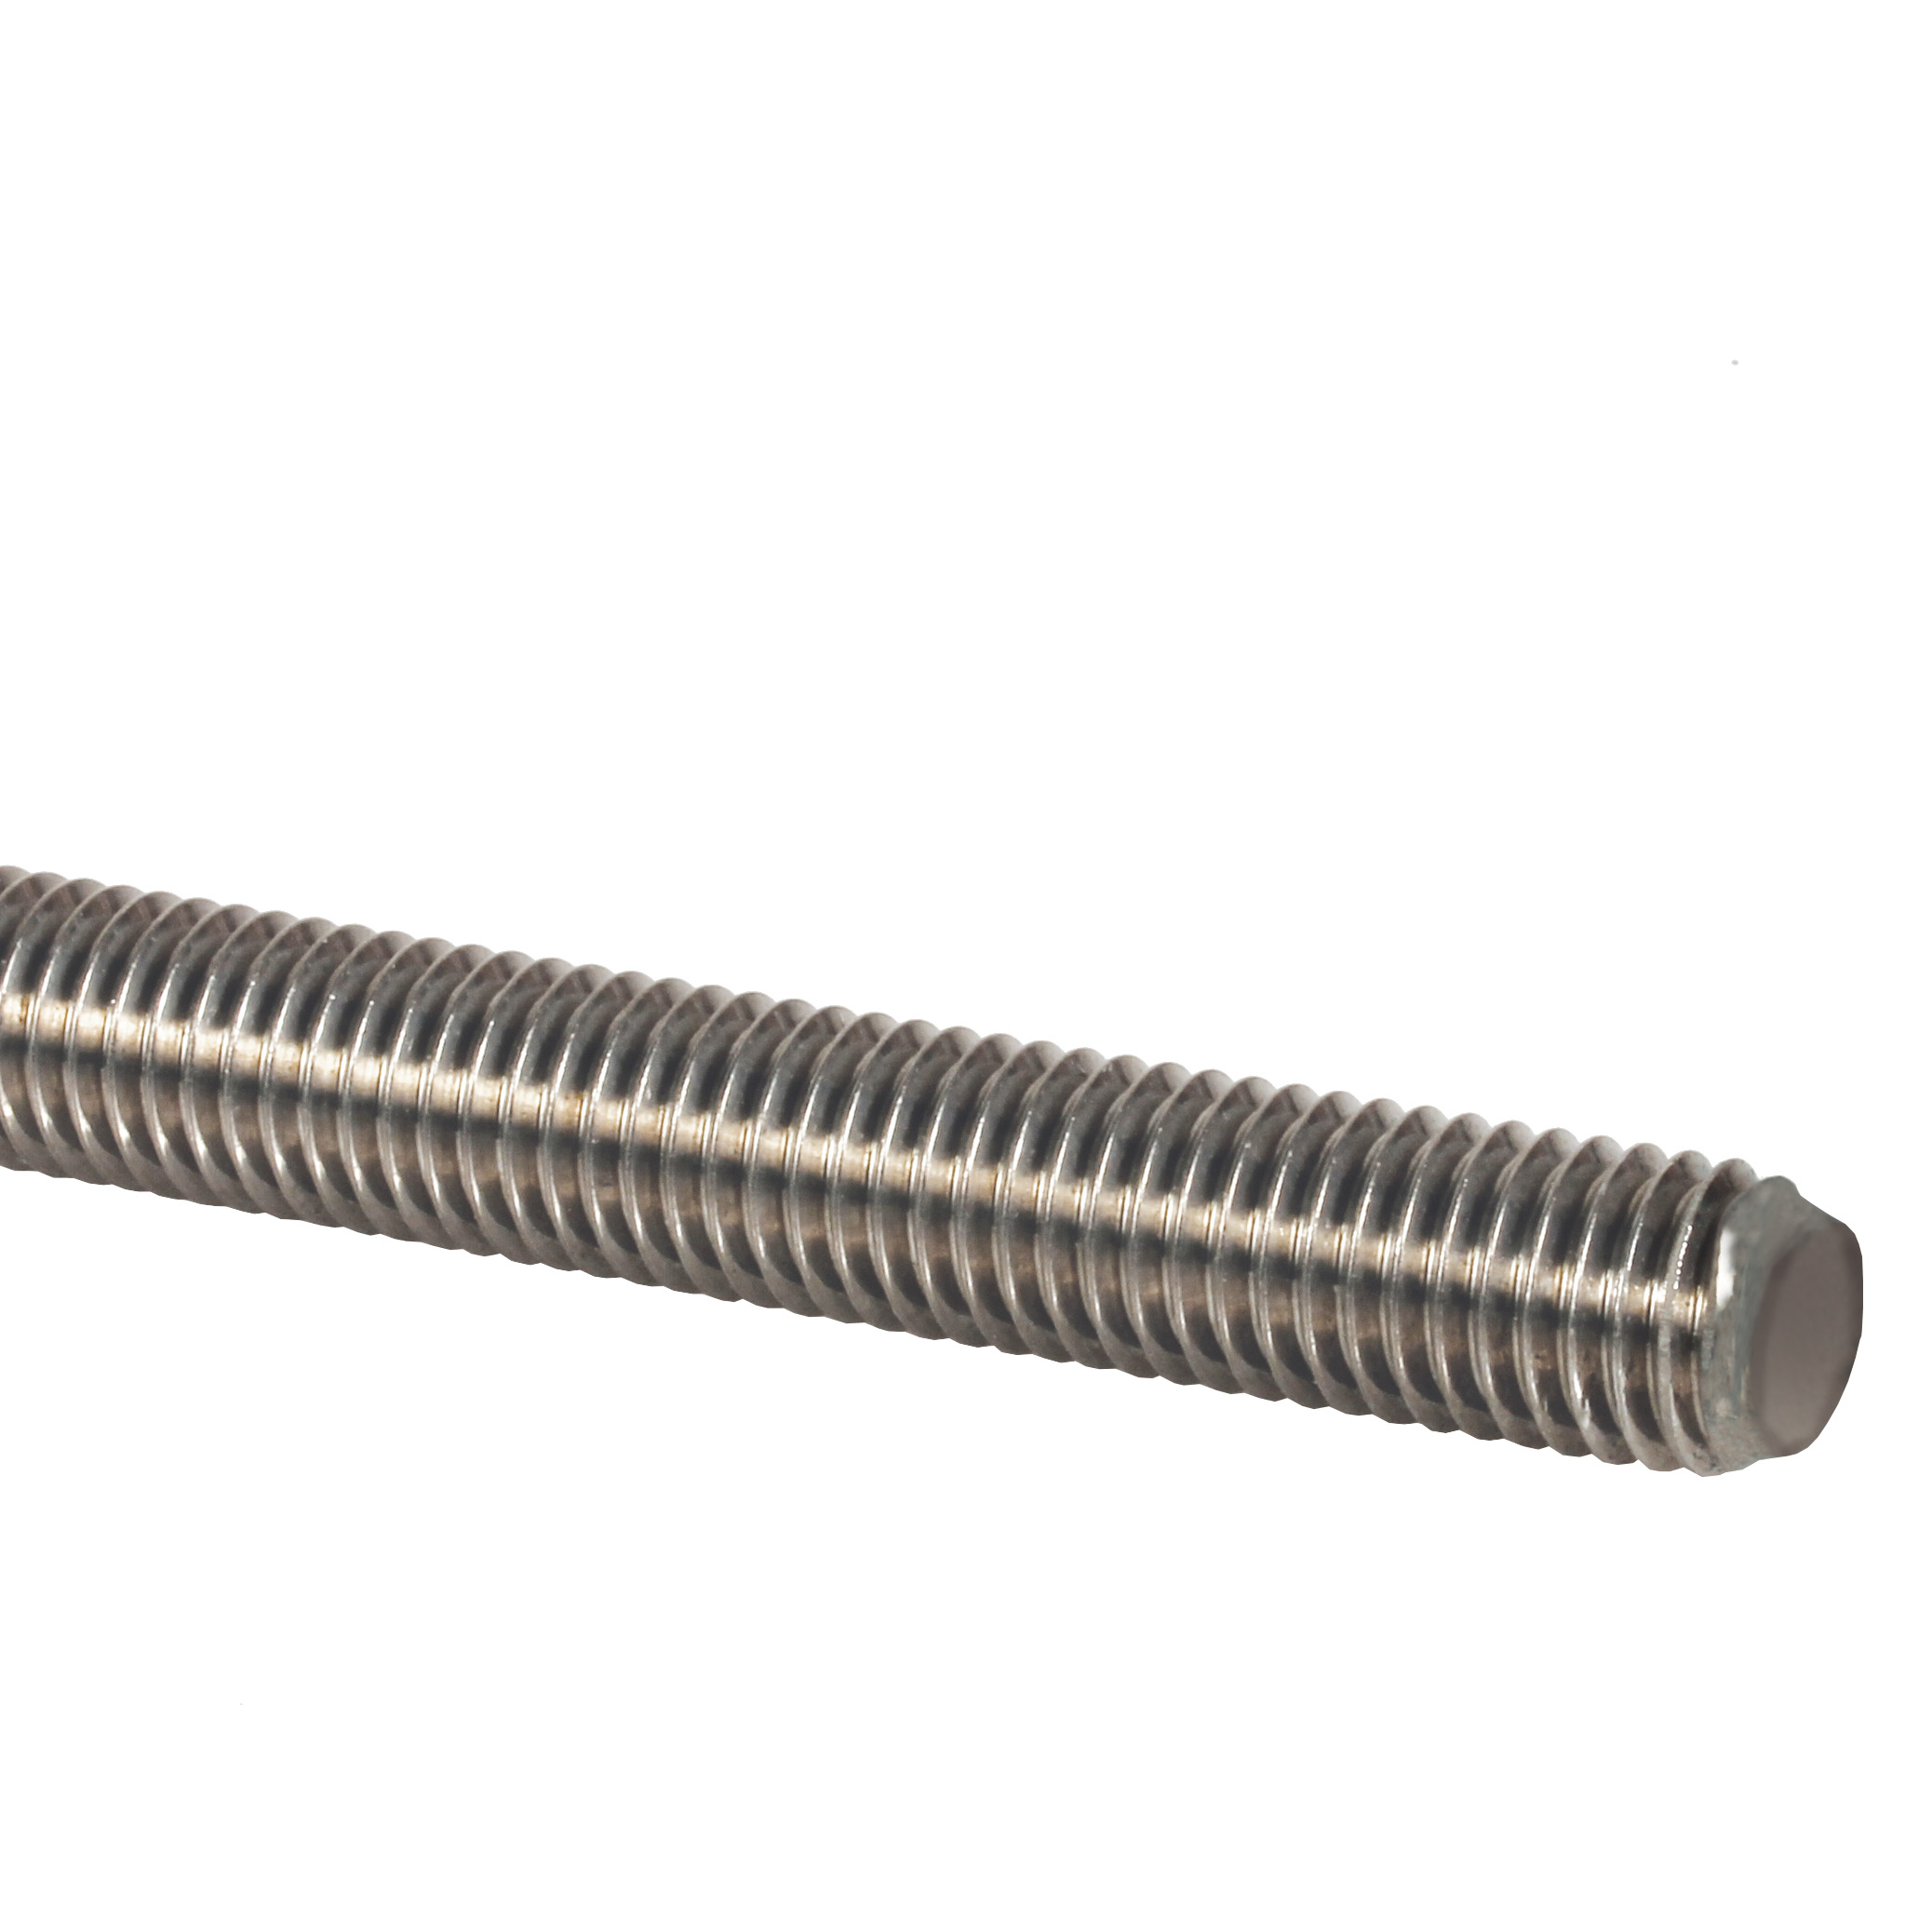 Threaded rod - DIN975 - Stainless steel  A2 -  - 